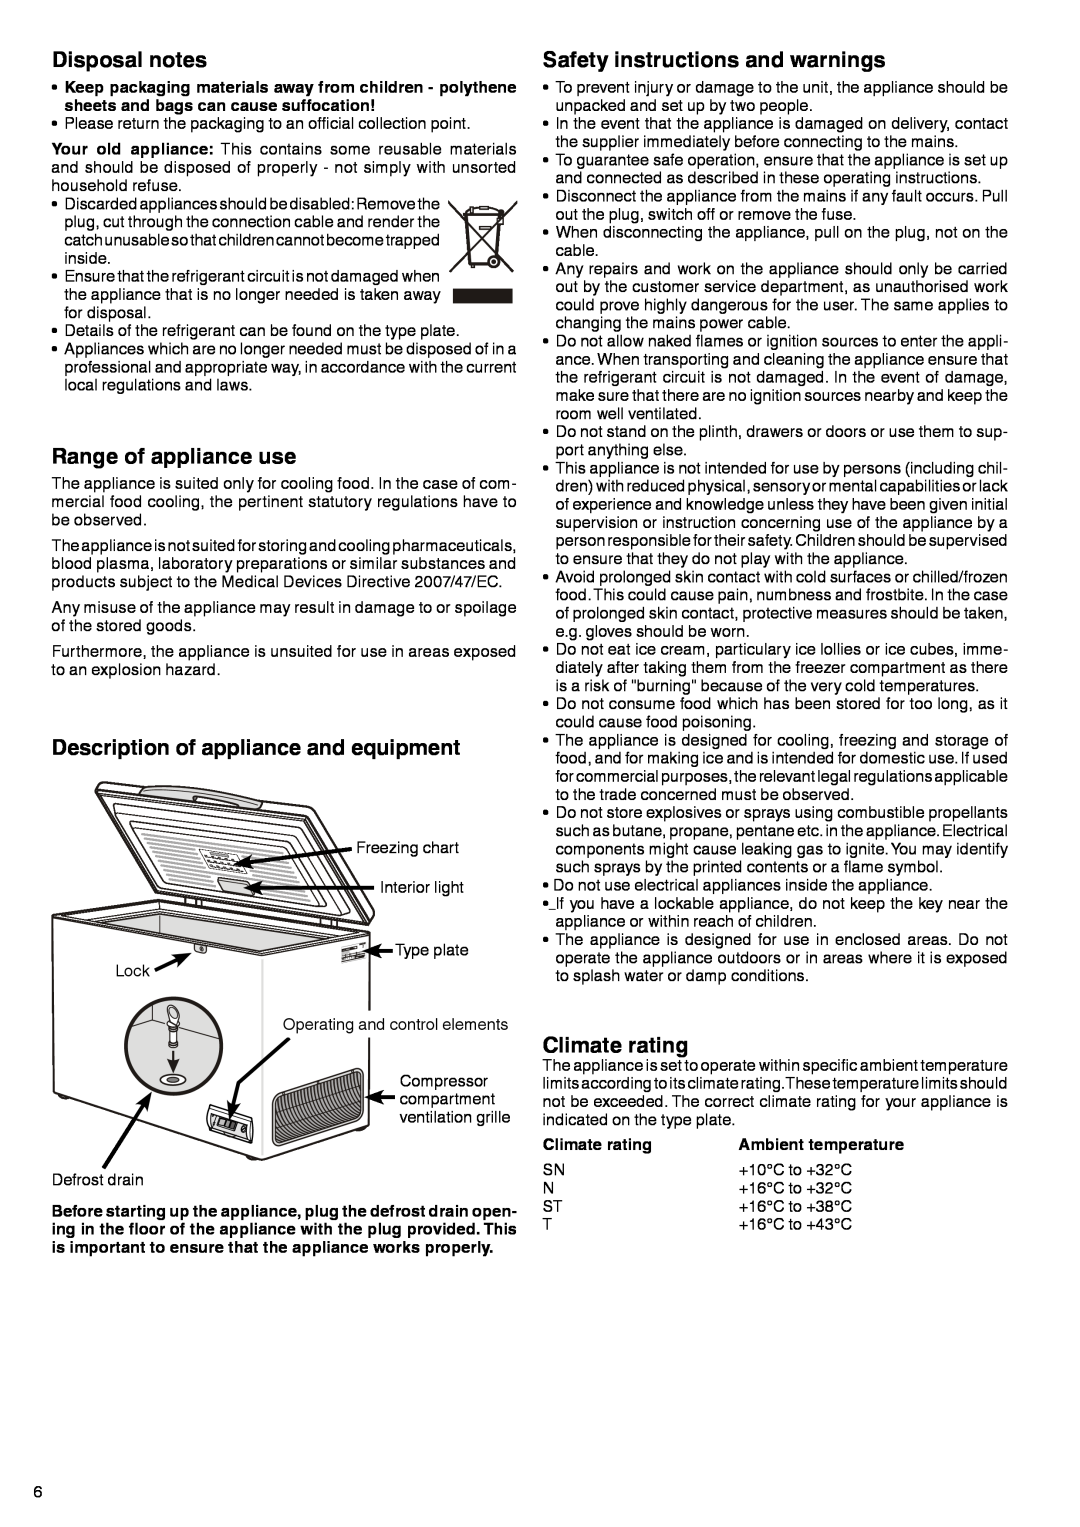 Liebherr 7081 157-00 manual Disposal notes, Range of appliance use, Description of appliance and equipment, Climate rating 